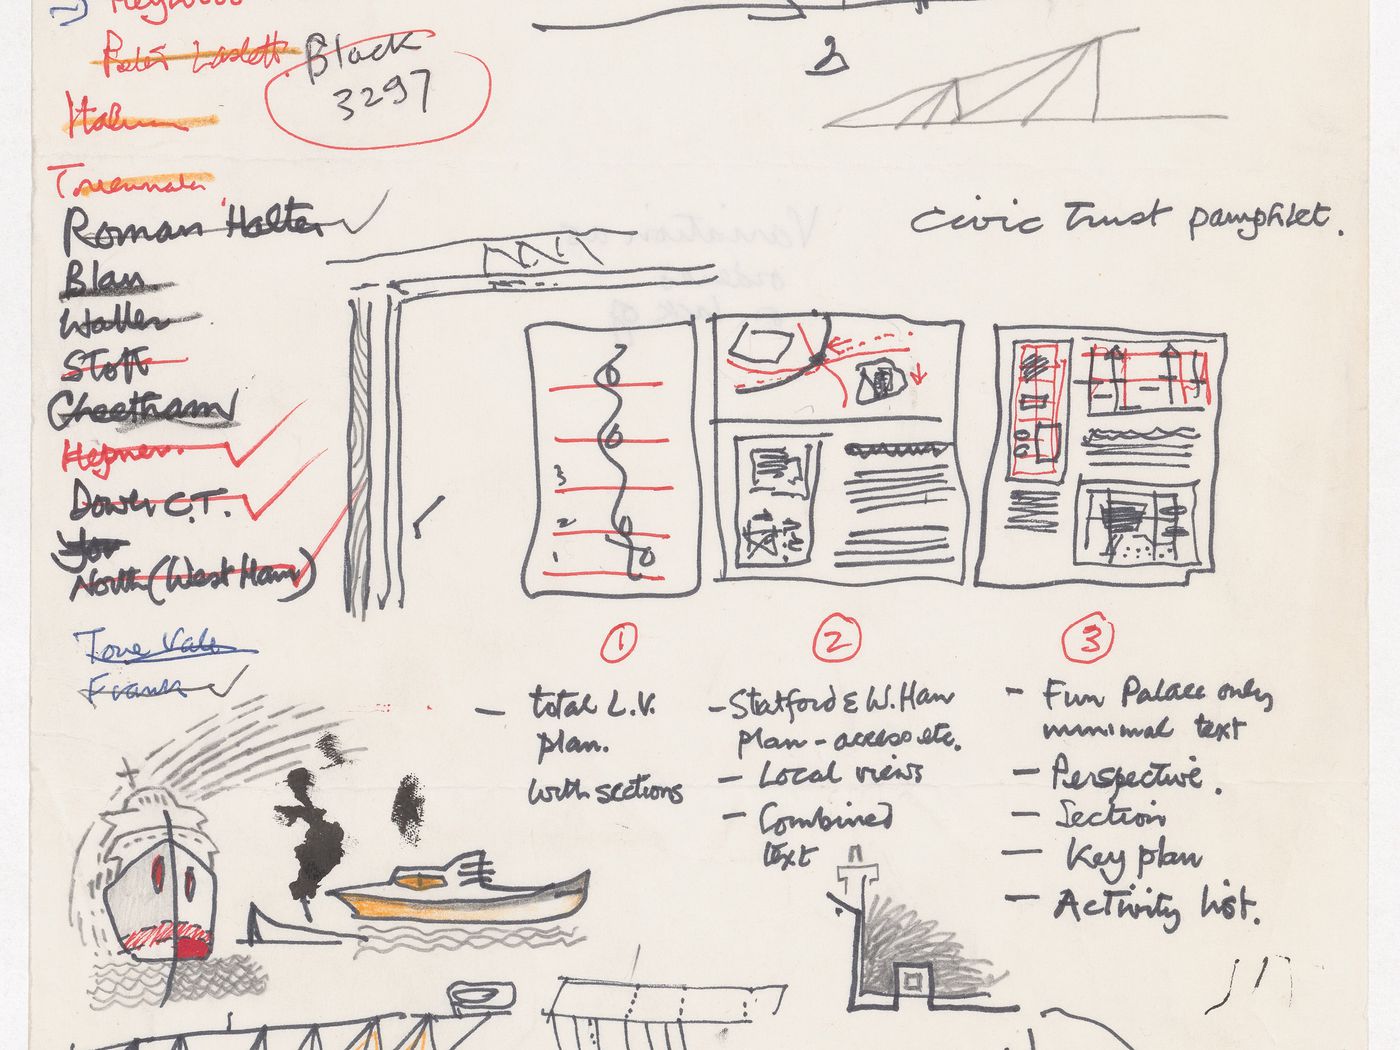 Sketches with annotations for a publication about the Civic Trust